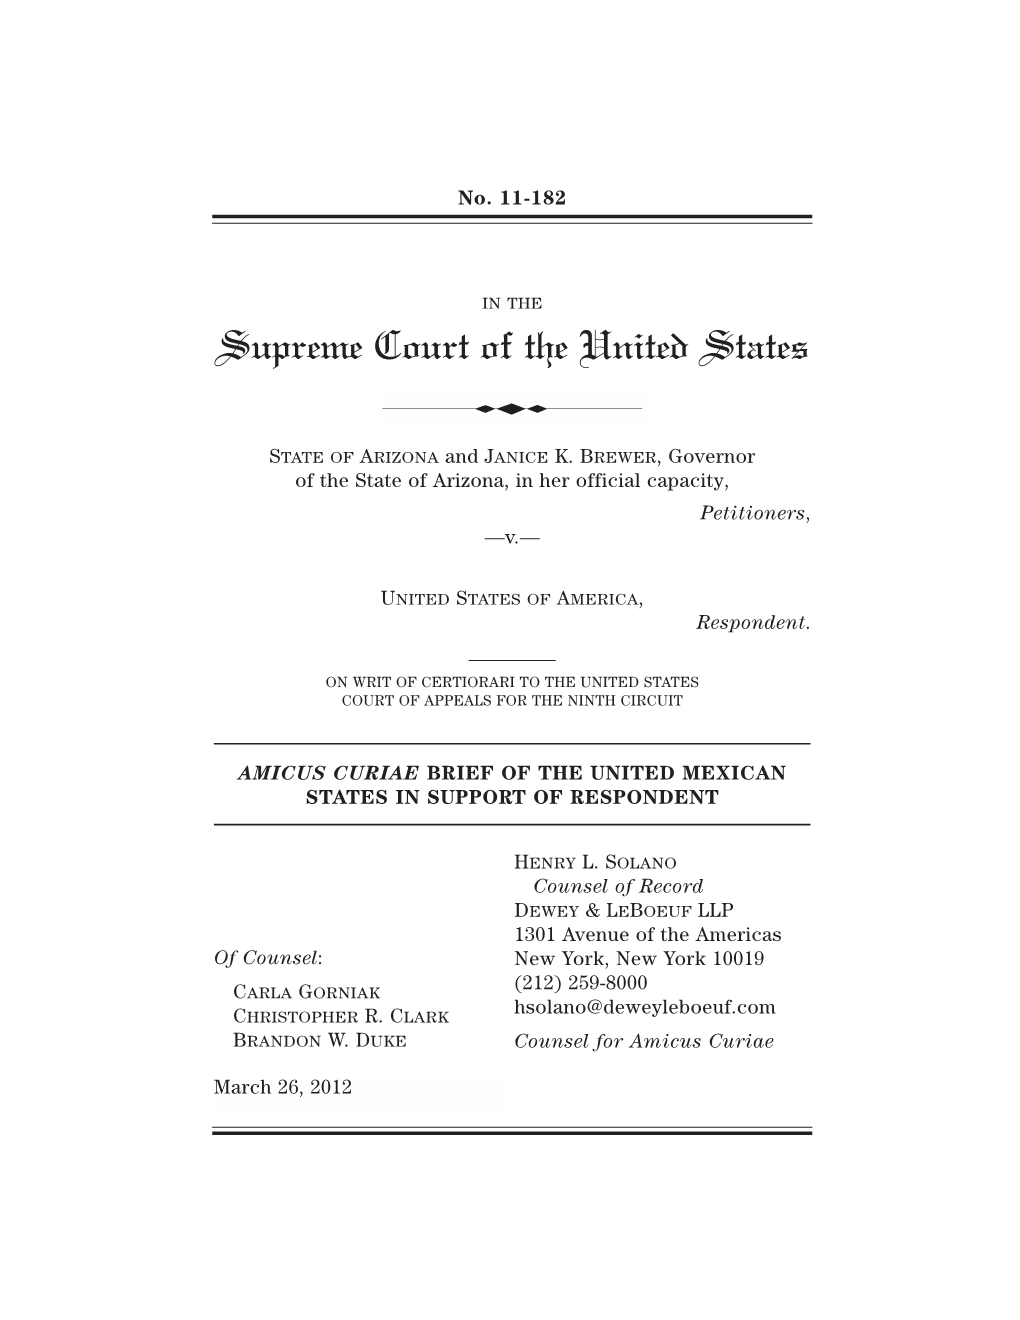 Brief of the United Mexican States in Support of Respondent